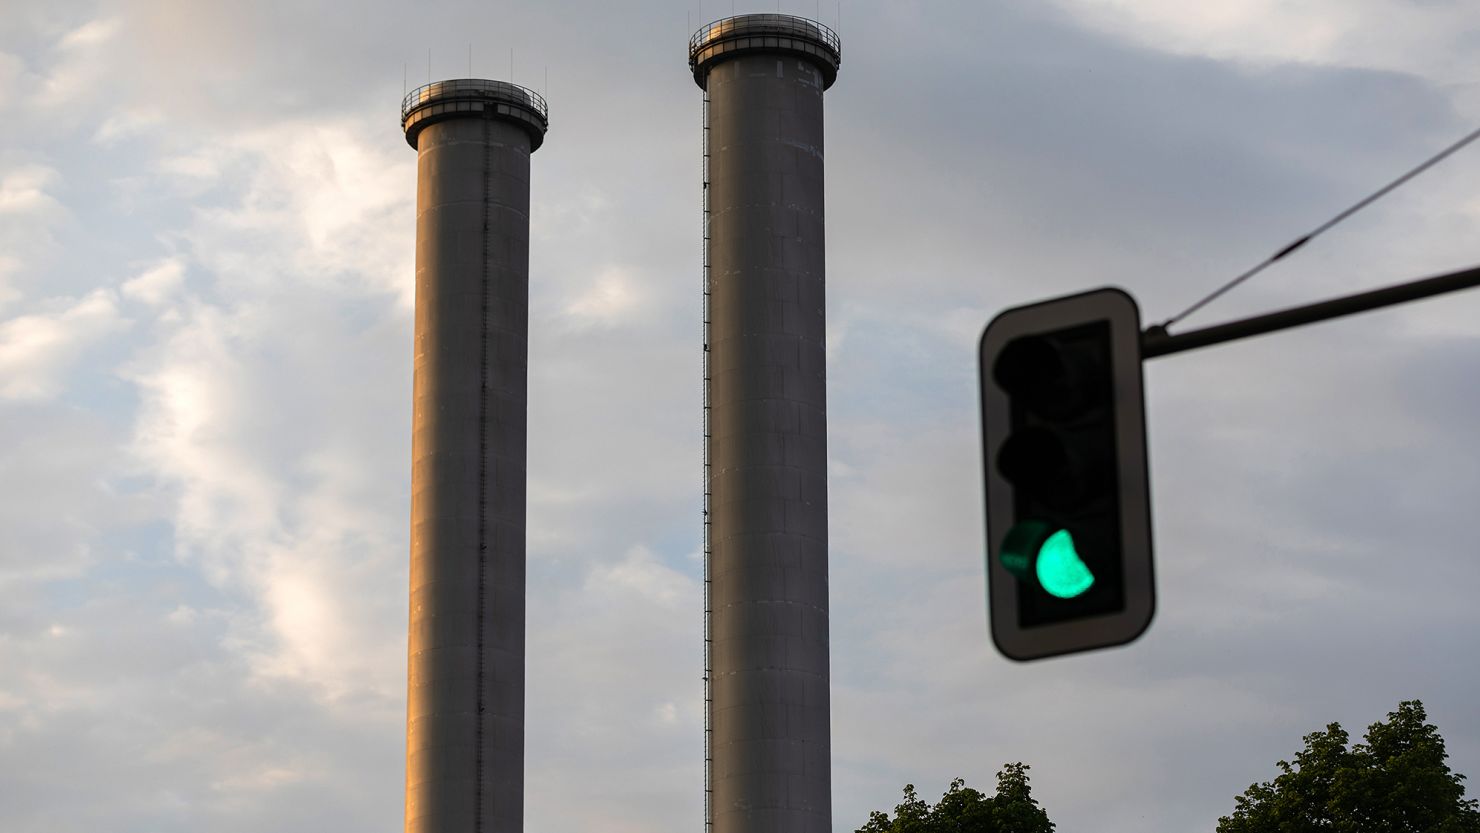 Chimney stacks at a natural gas power plant in Berlin.